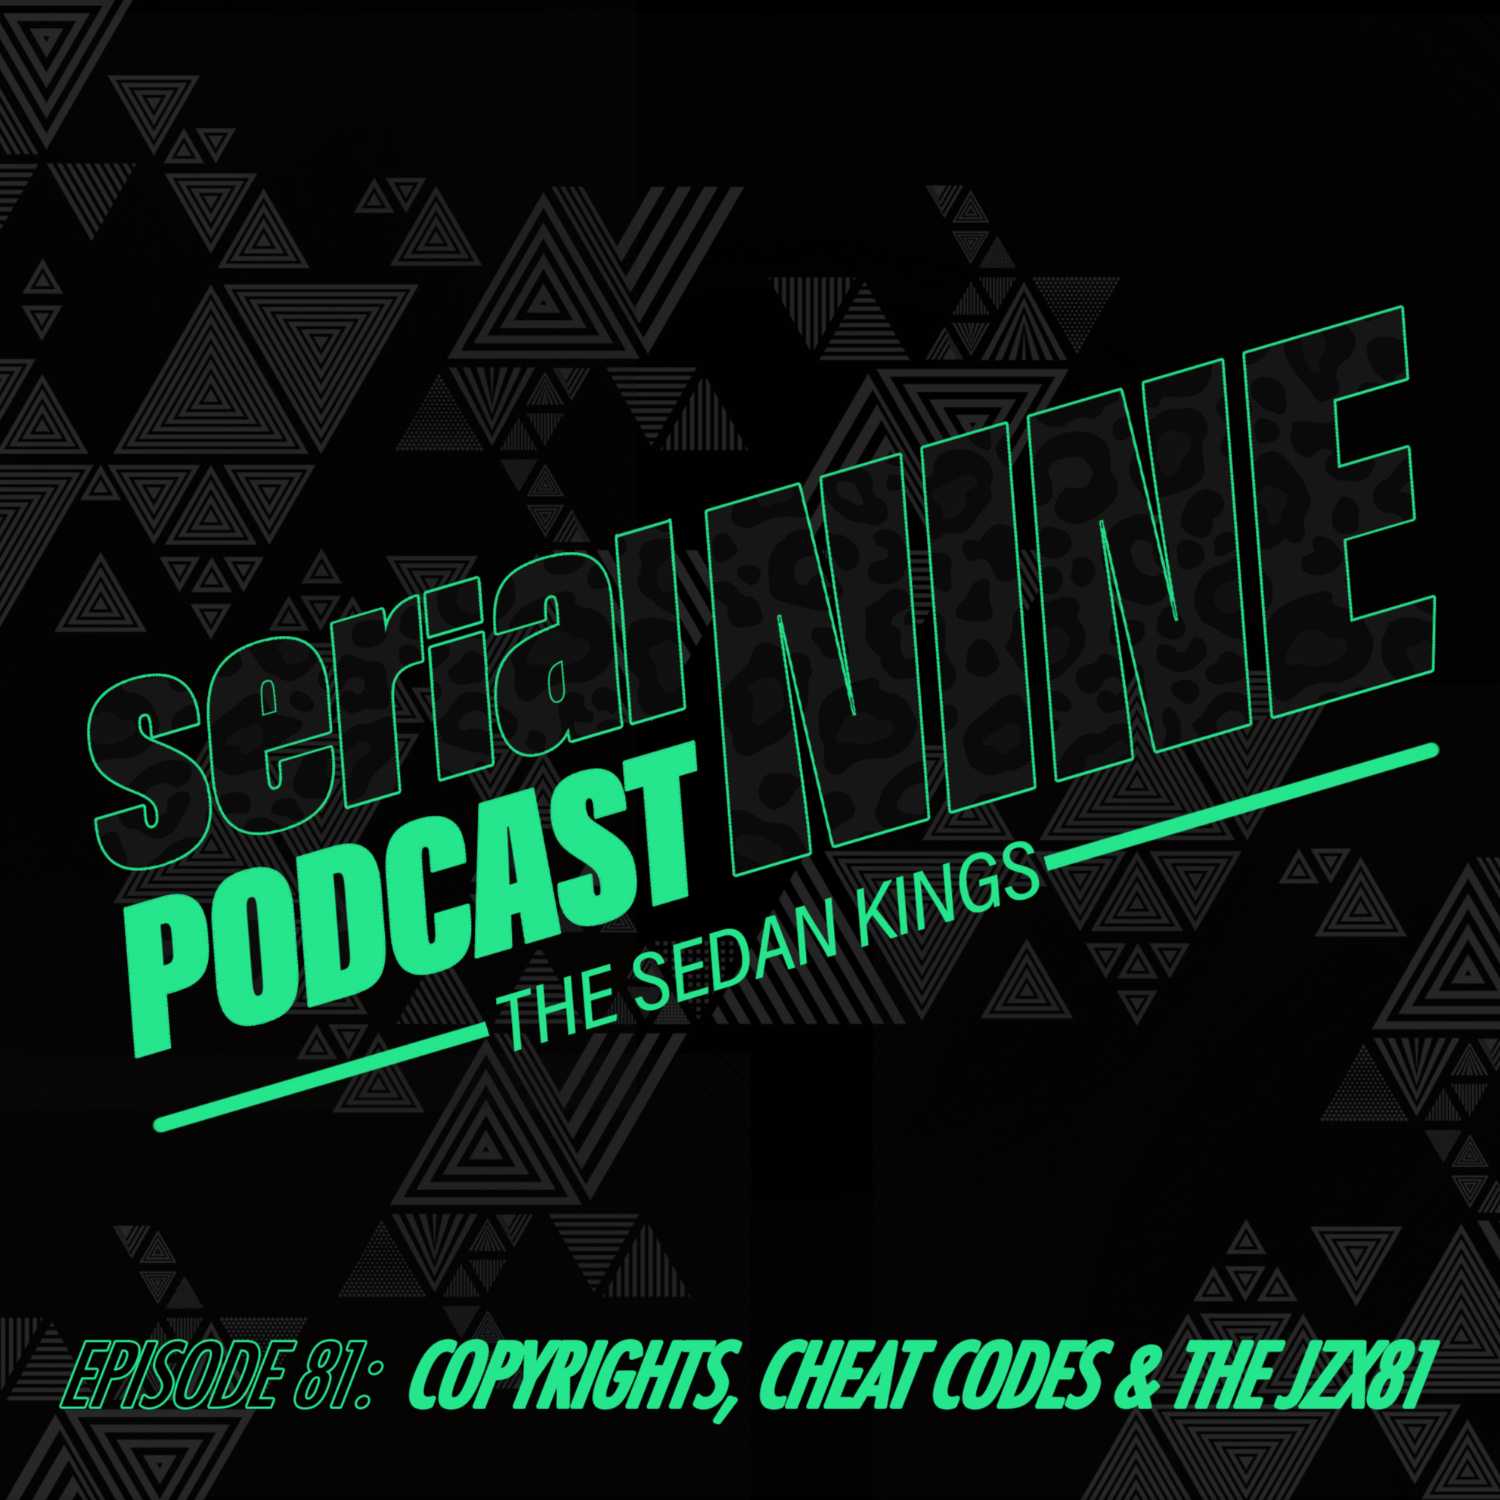 SerialPodcastNine Episode 81 Copyrights, Cheat Codes and the JZX81